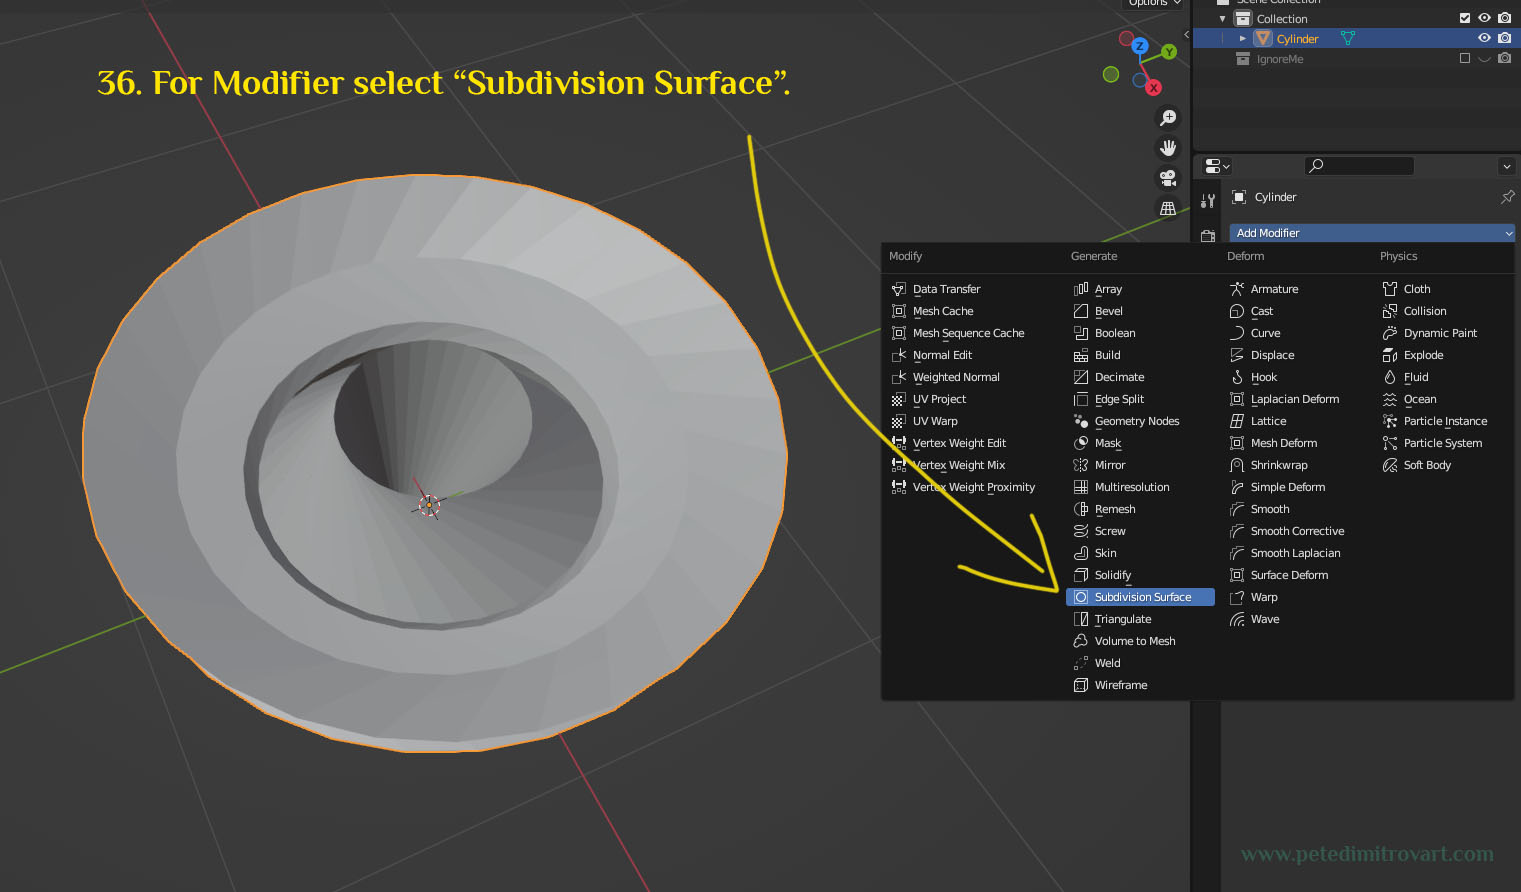 The screenshot now is identical to before but the “Add Modifier” tab is expanded and one can observe all the different types. The image shows “Subdivision Surface” selected and clicked on.